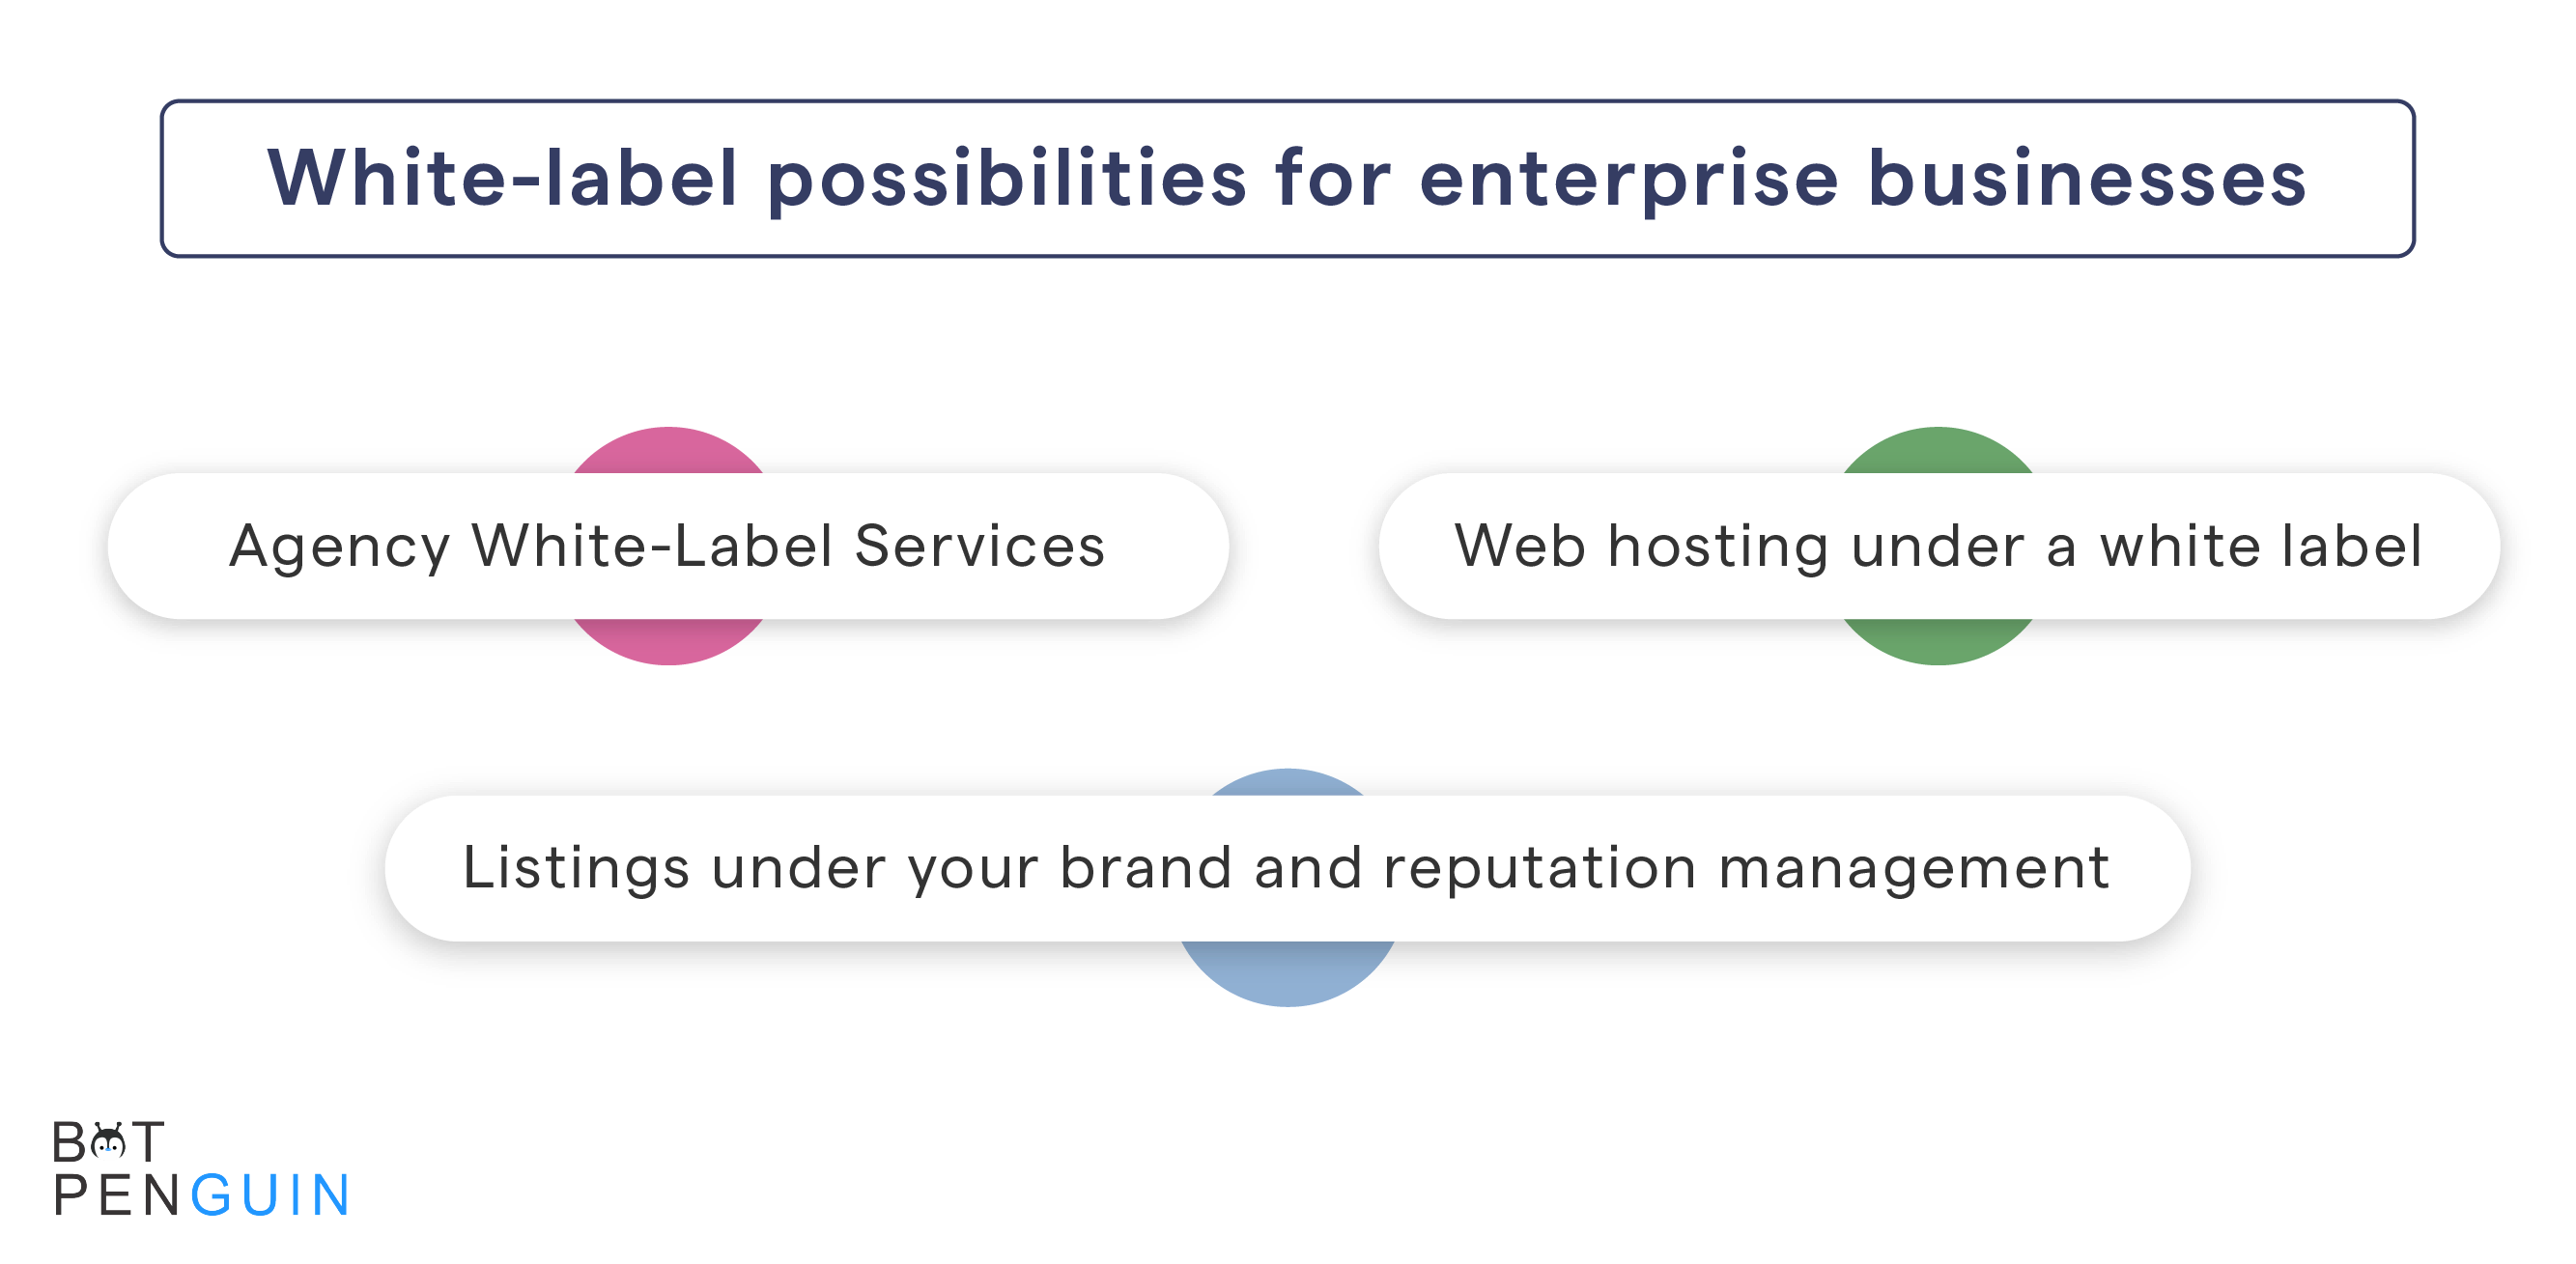 The following are some white-label possibilities for enterprise businesses to consider: